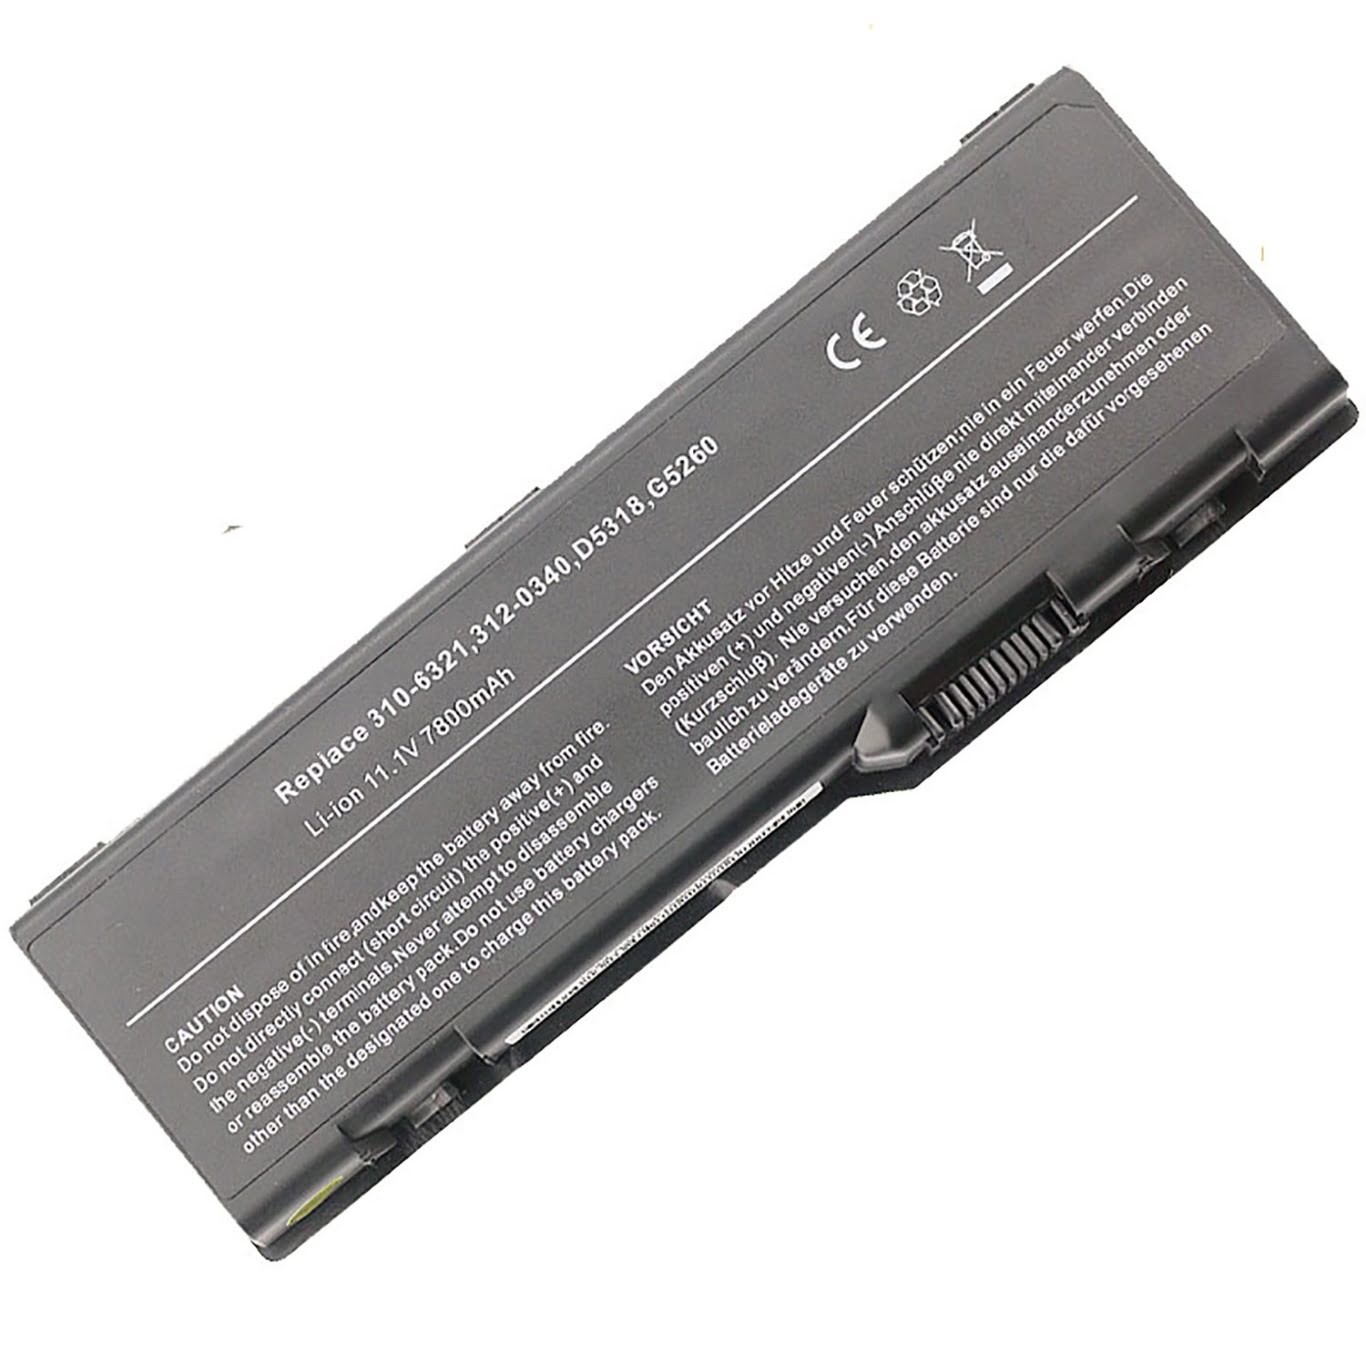 0C5449, 0C5454 replacement Laptop Battery for Dell Inspiron 6000, Inspiron 9200, 9 cells, 11.1V, 6600mAh